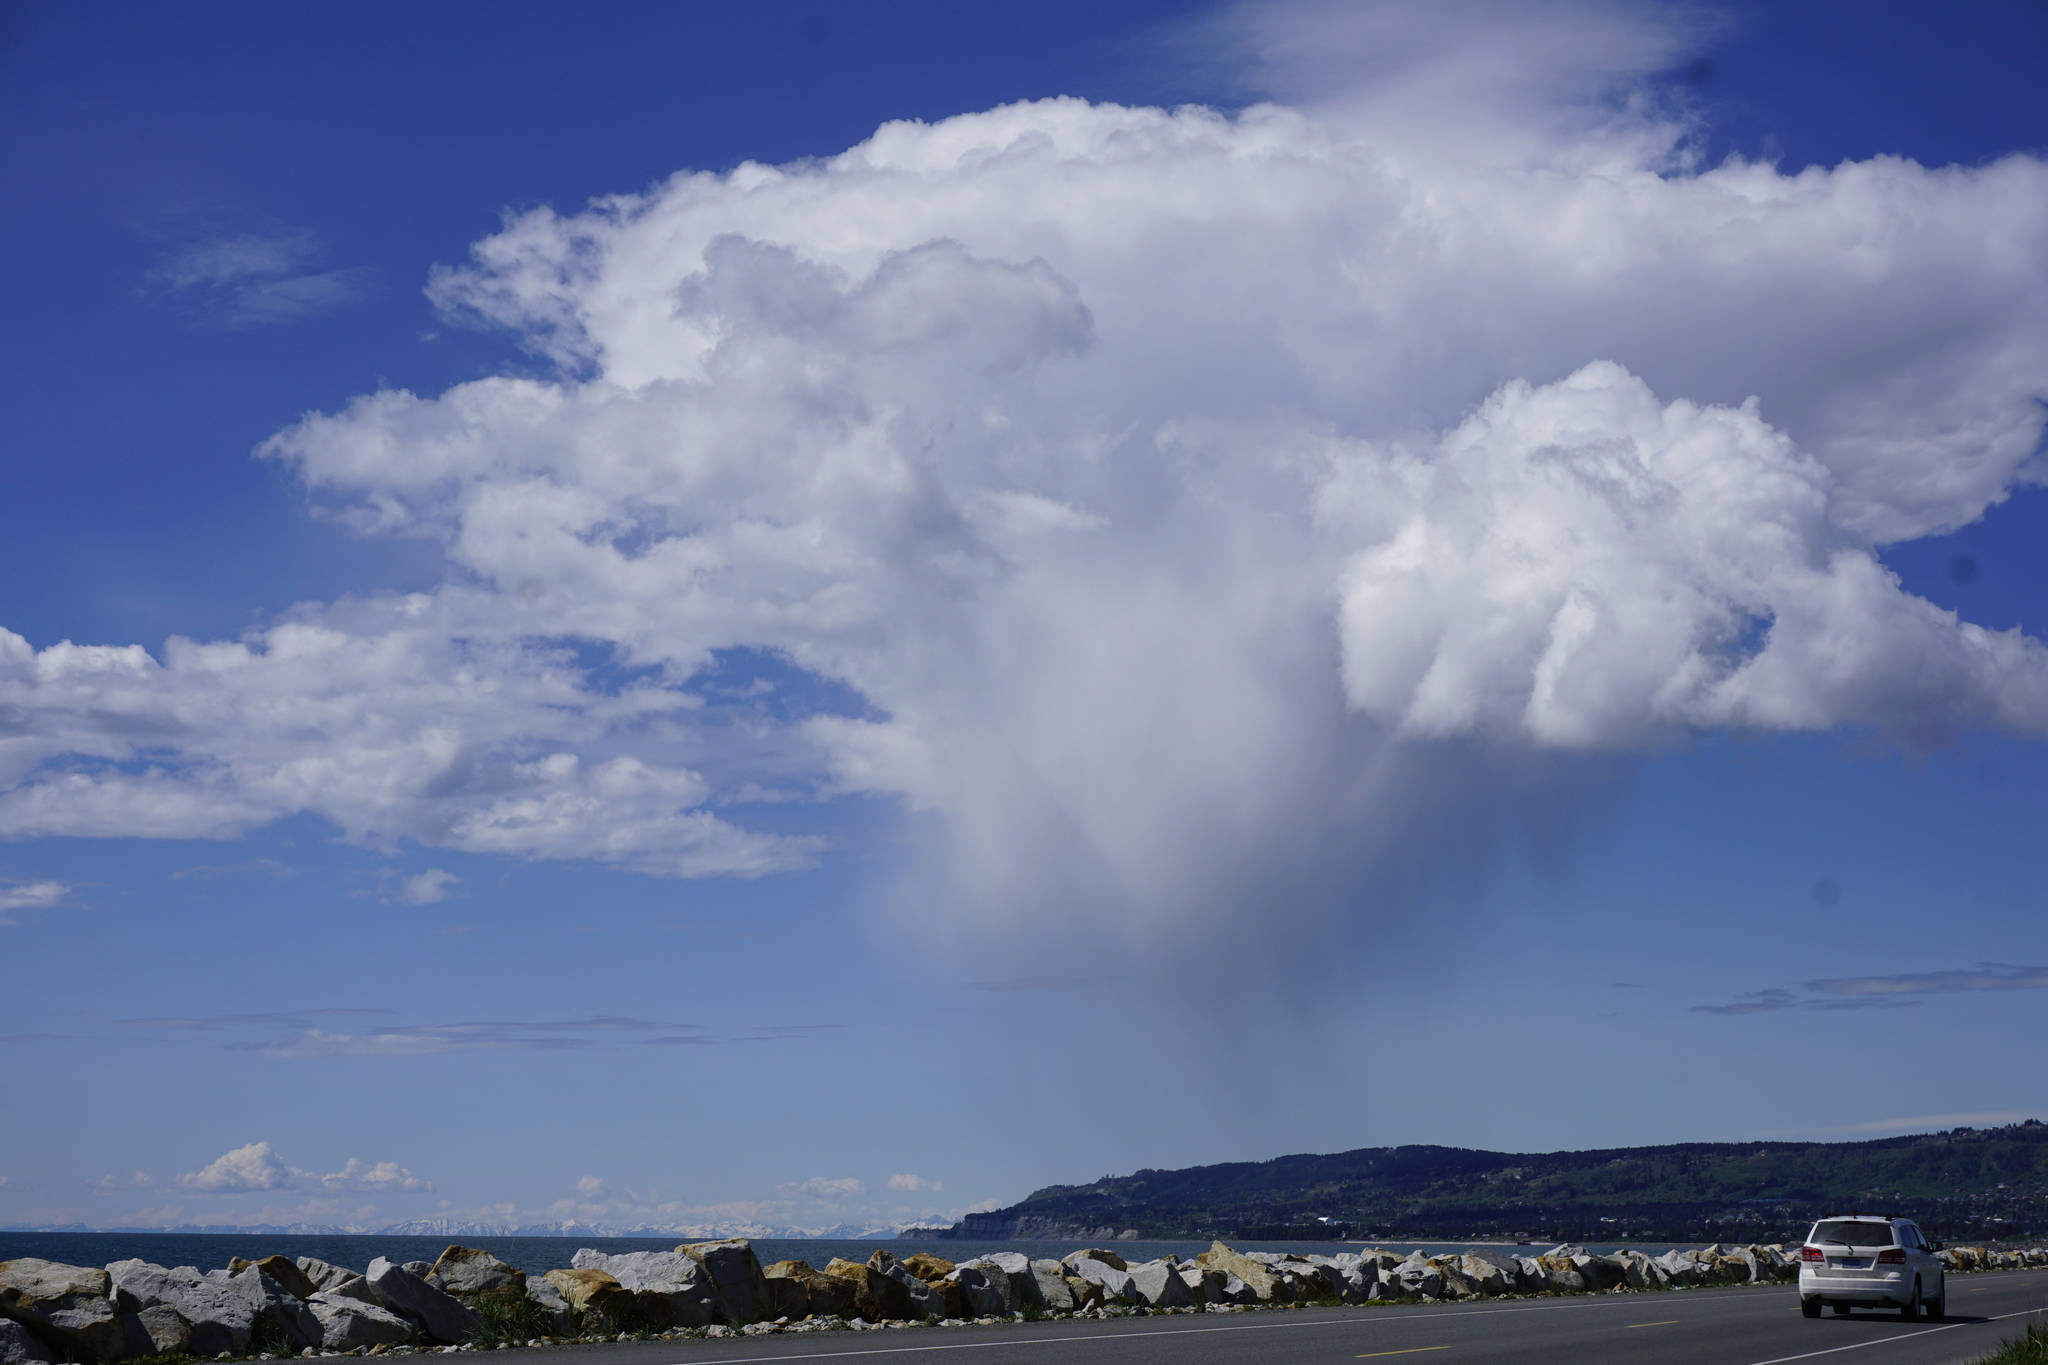 A rain cloud hangs over the hills above Homer on Friday, June 1, as seen from the Homer Spit Road. (Photo by Michael Armstrong/Homer News)